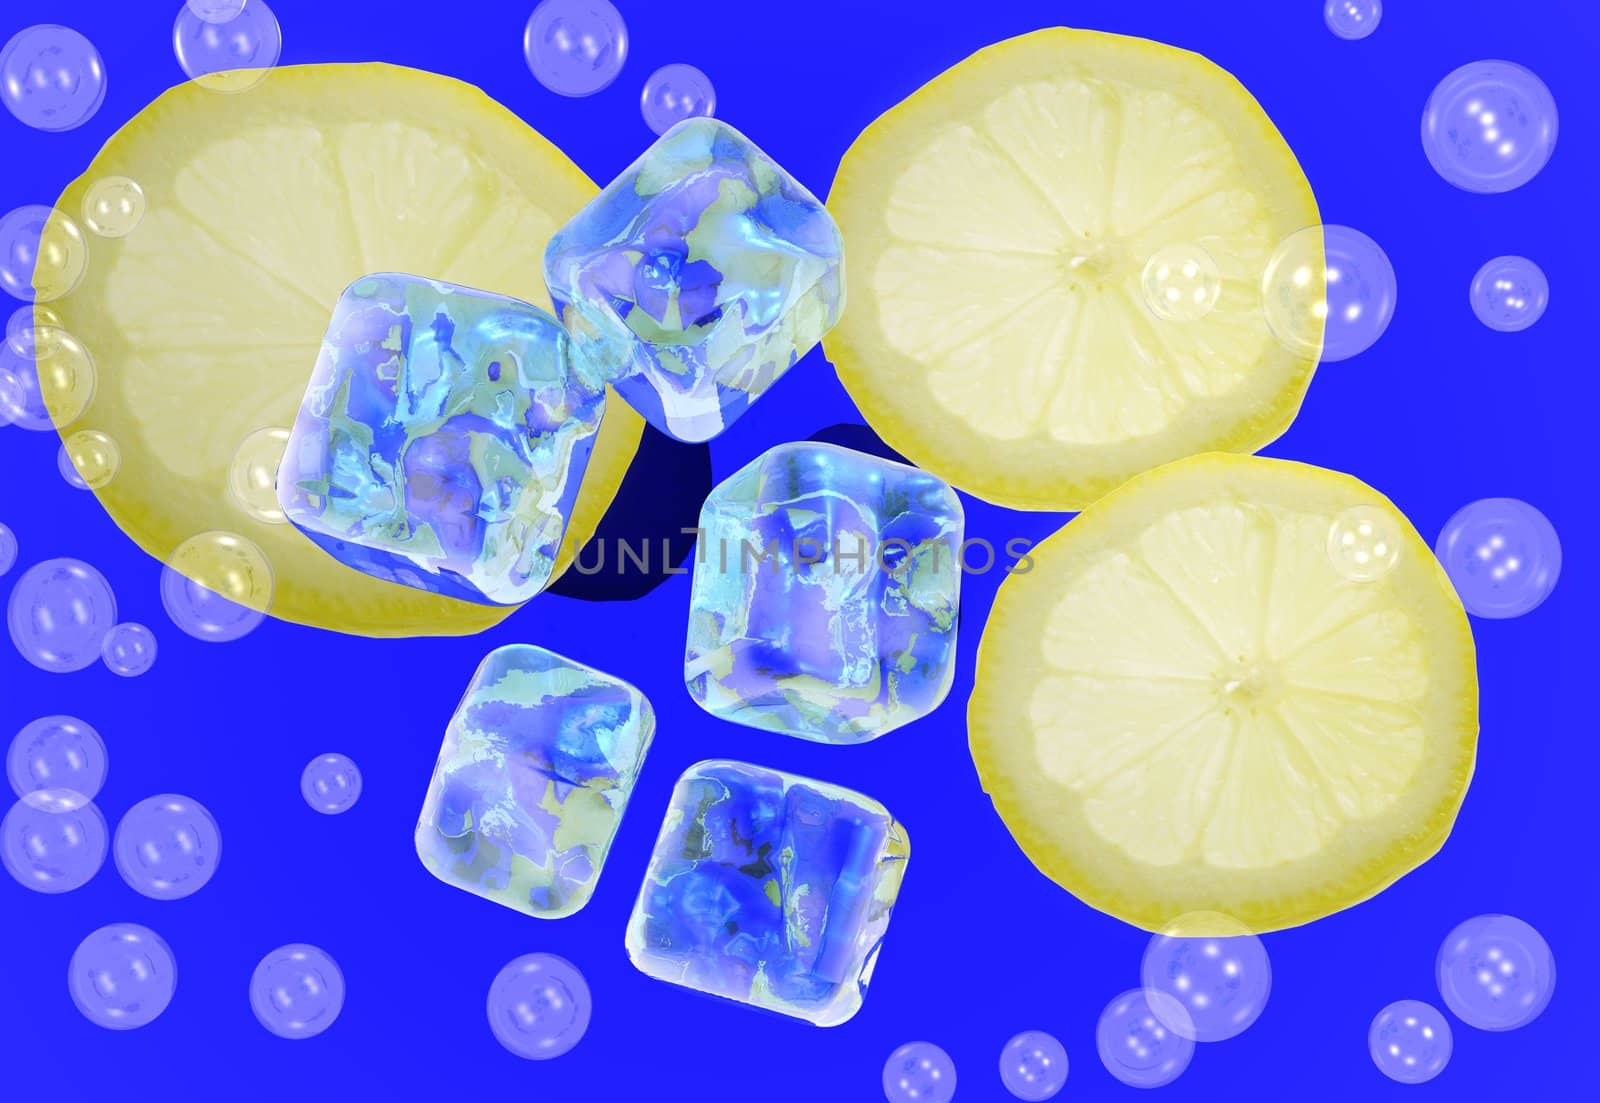 Ice cube and lemon slices in a drink with bubbles